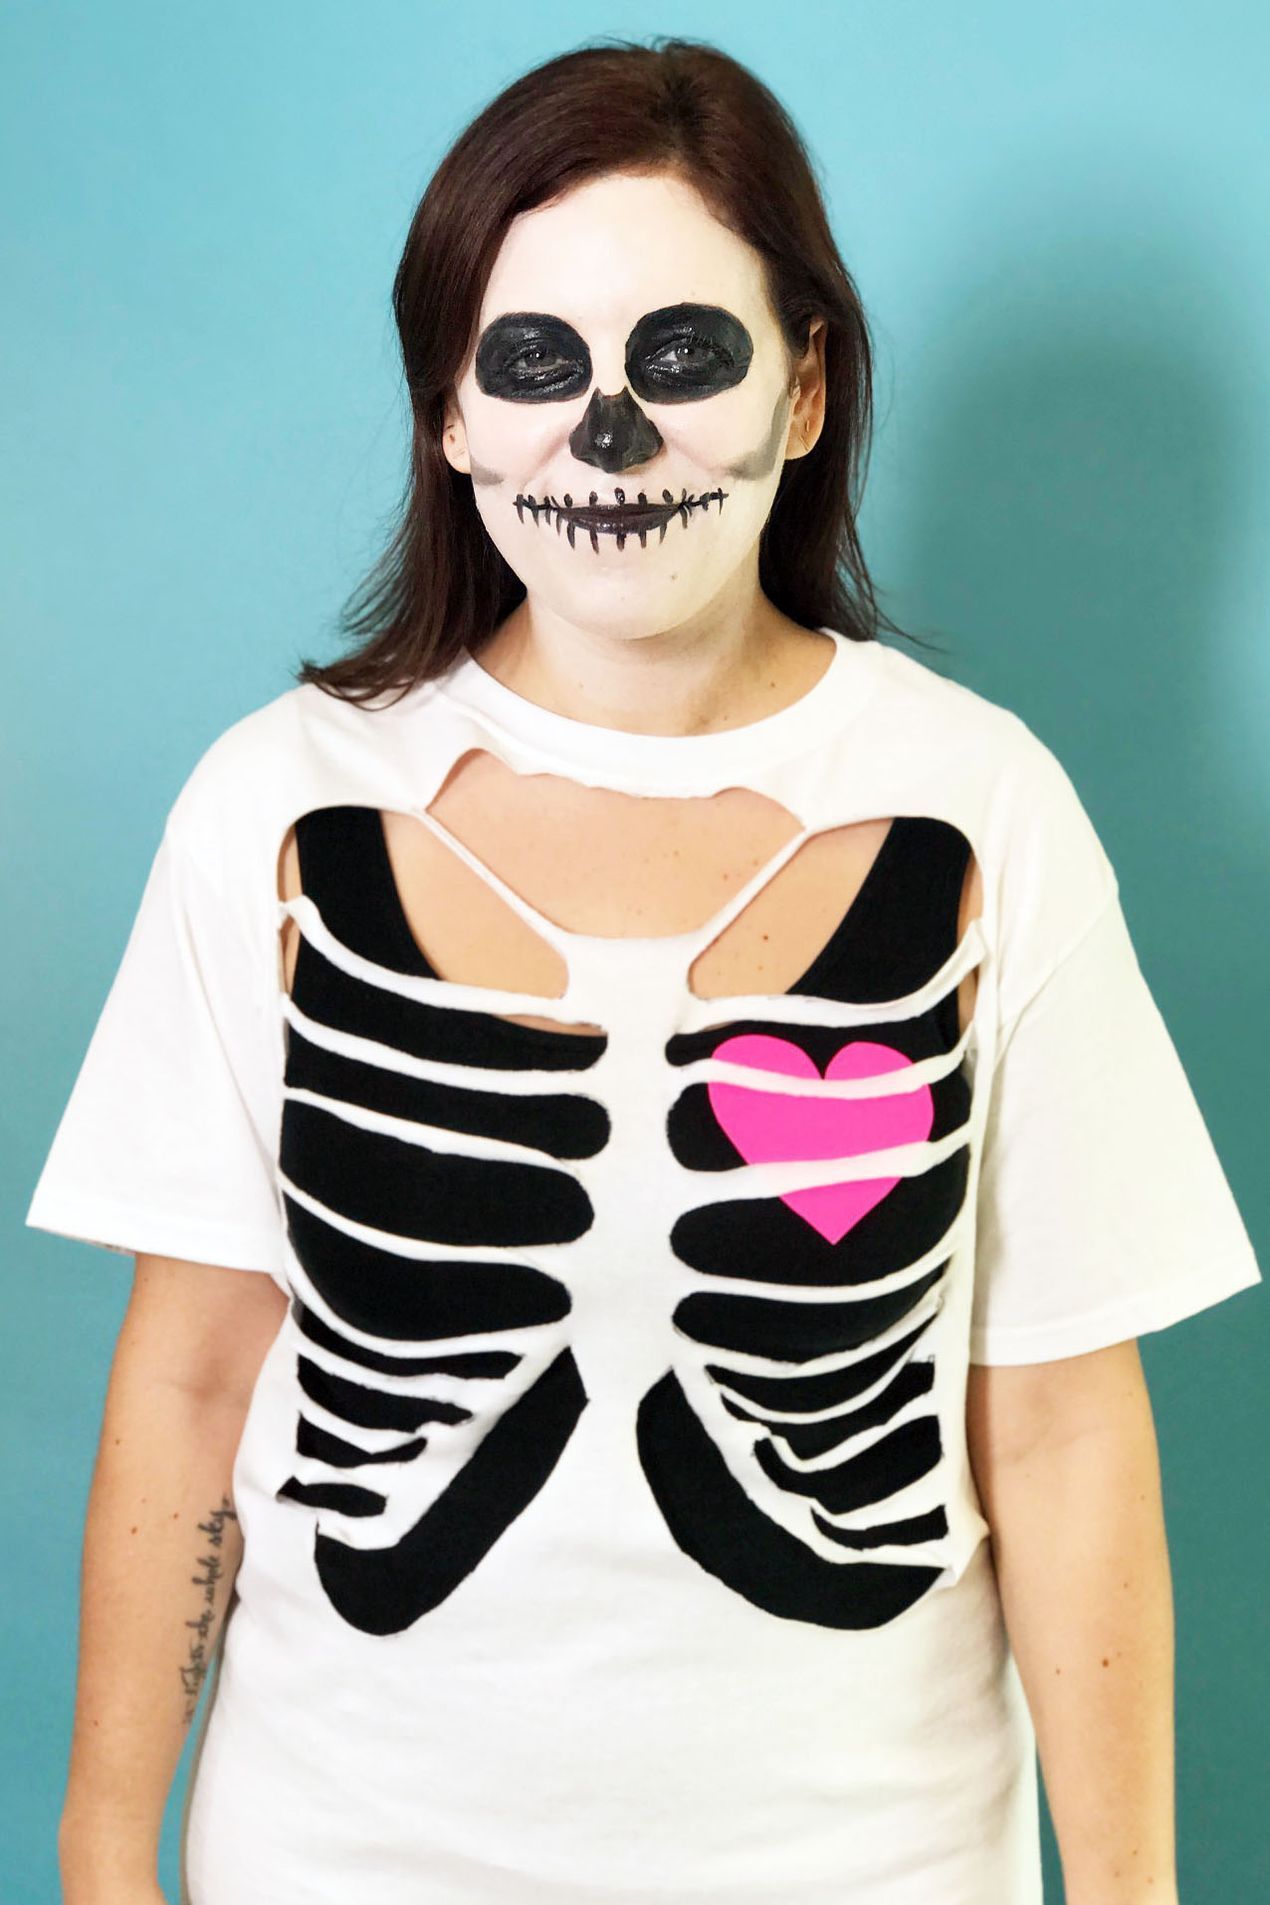 50+ Easy Homemade Halloween Costumes to DIY This Year - 50+ Easy Homemade Halloween Costumes to DIY This Year -   18 diy Halloween Costumes for moms ideas